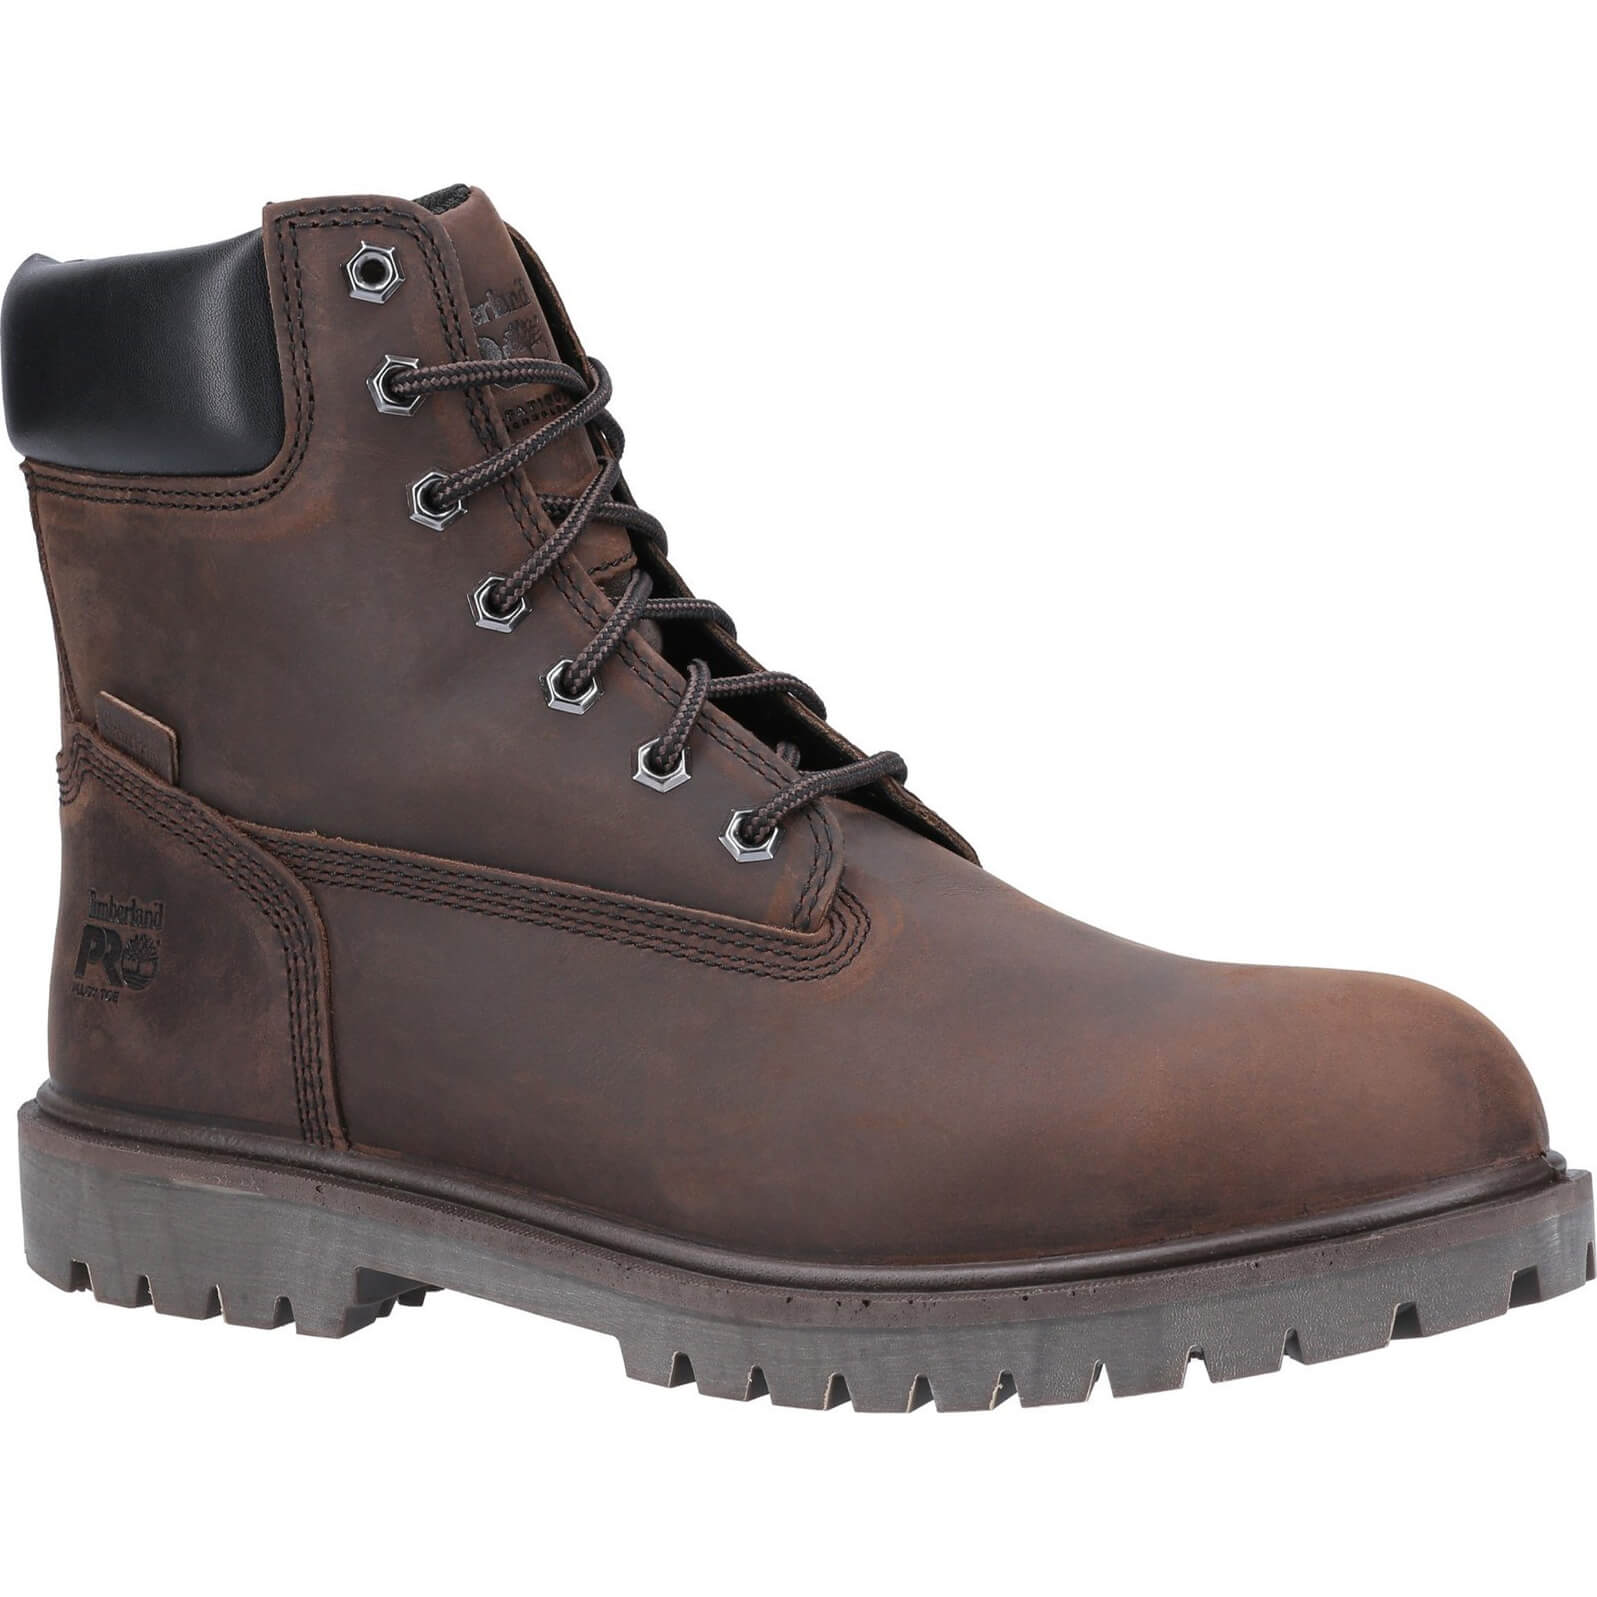 Image of Timberland Pro Iconic Safety Toe Work Boot Brown Size 10.5